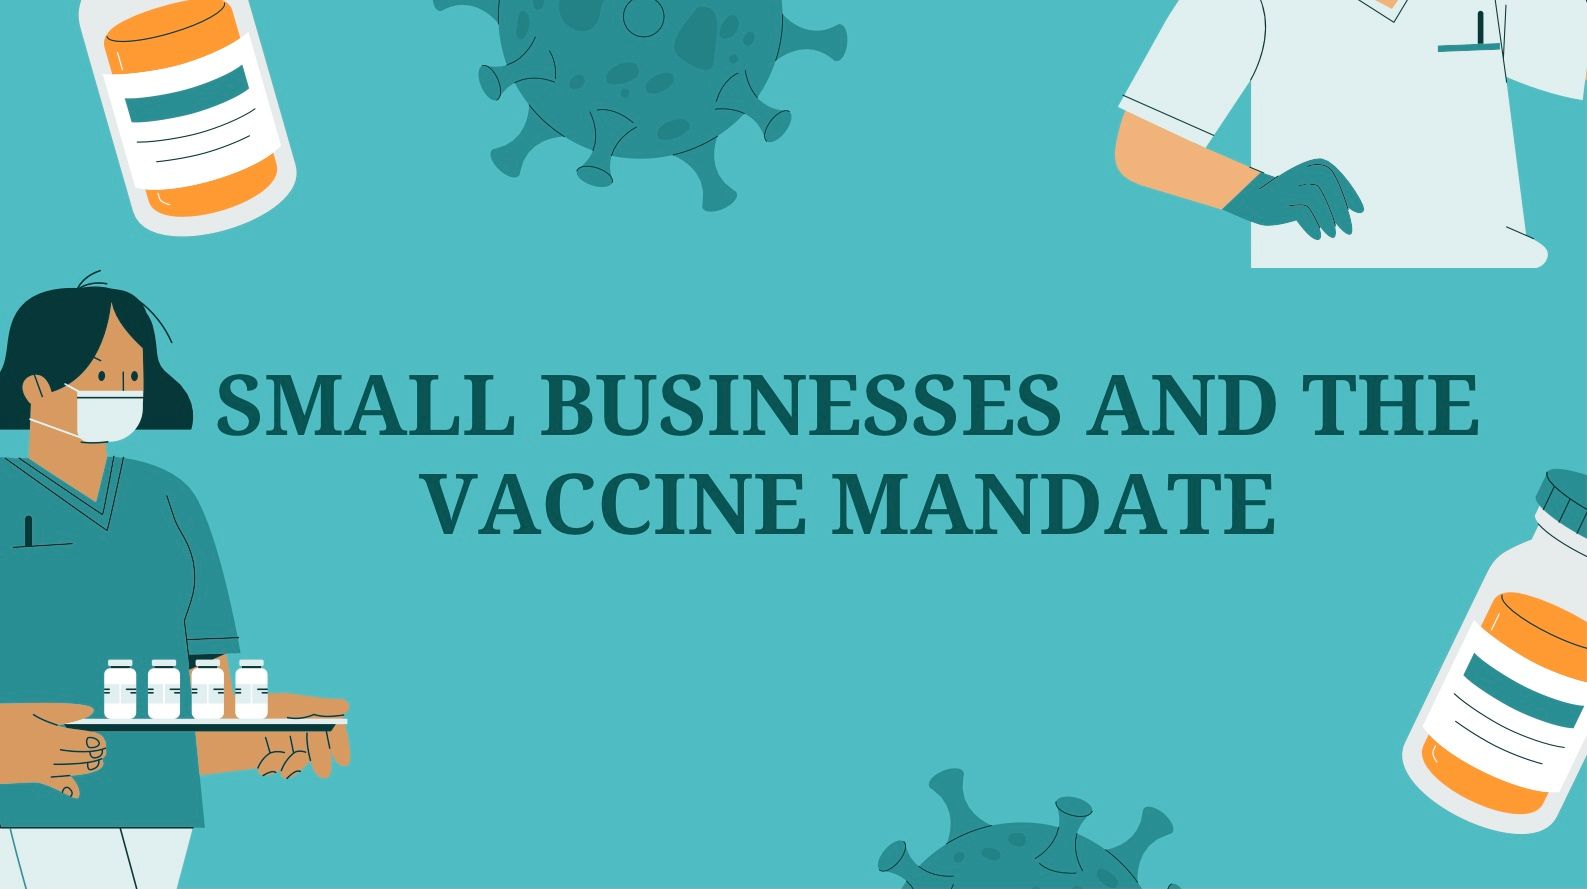 Small Businesses and The Vaccine Mandate: Why Remote Work is The Answer